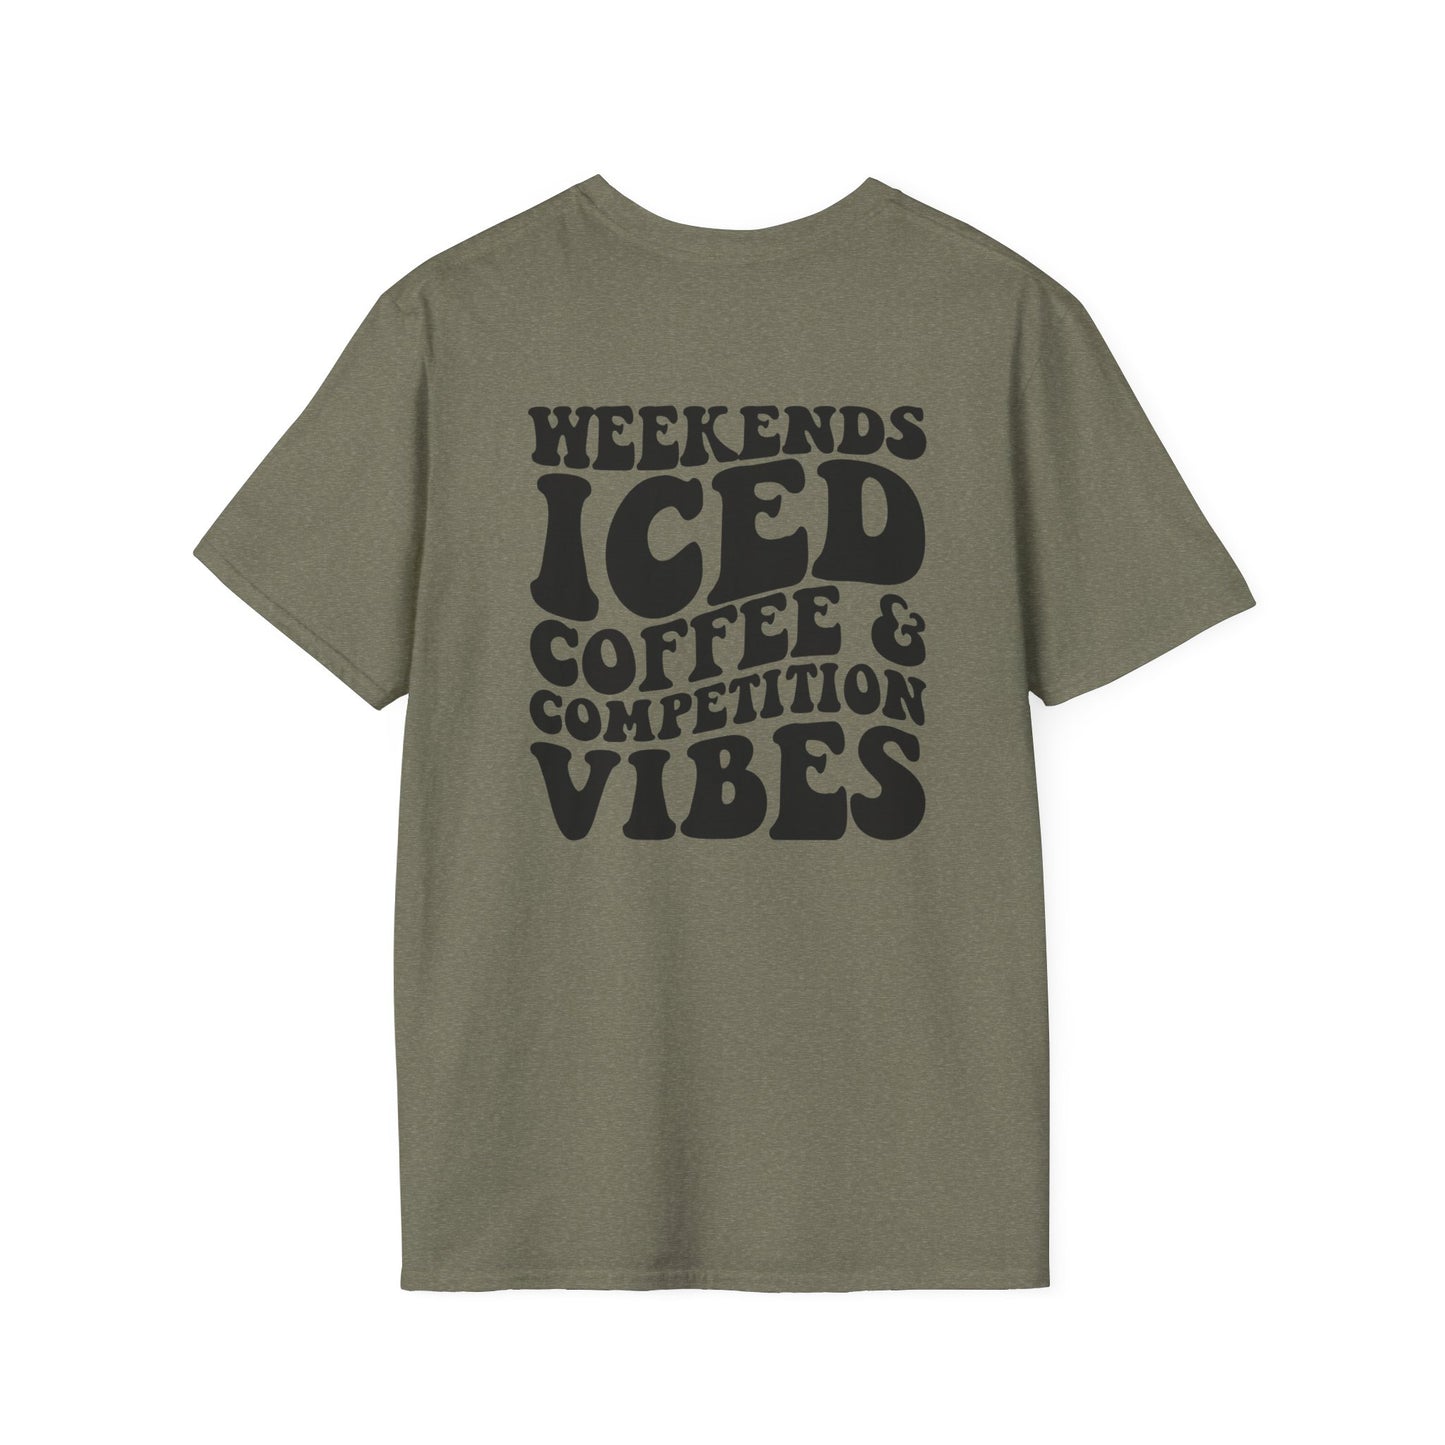 Weekends Ice Coffee Comp Vibes - Unisex Softstyle T-Shirt